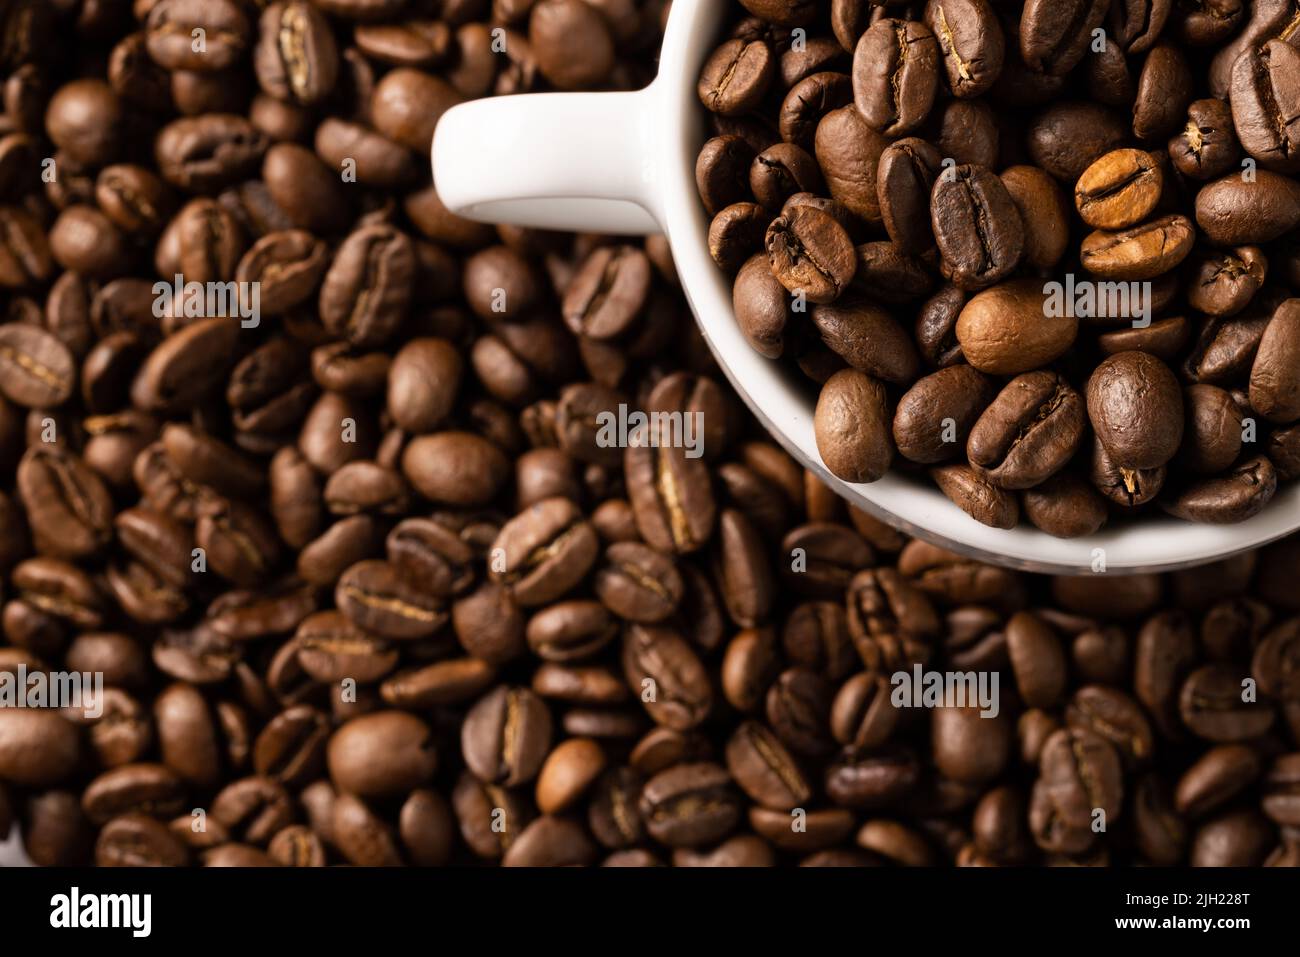 Image of white cup full of coffee beans on pile of coffee beans Stock Photo